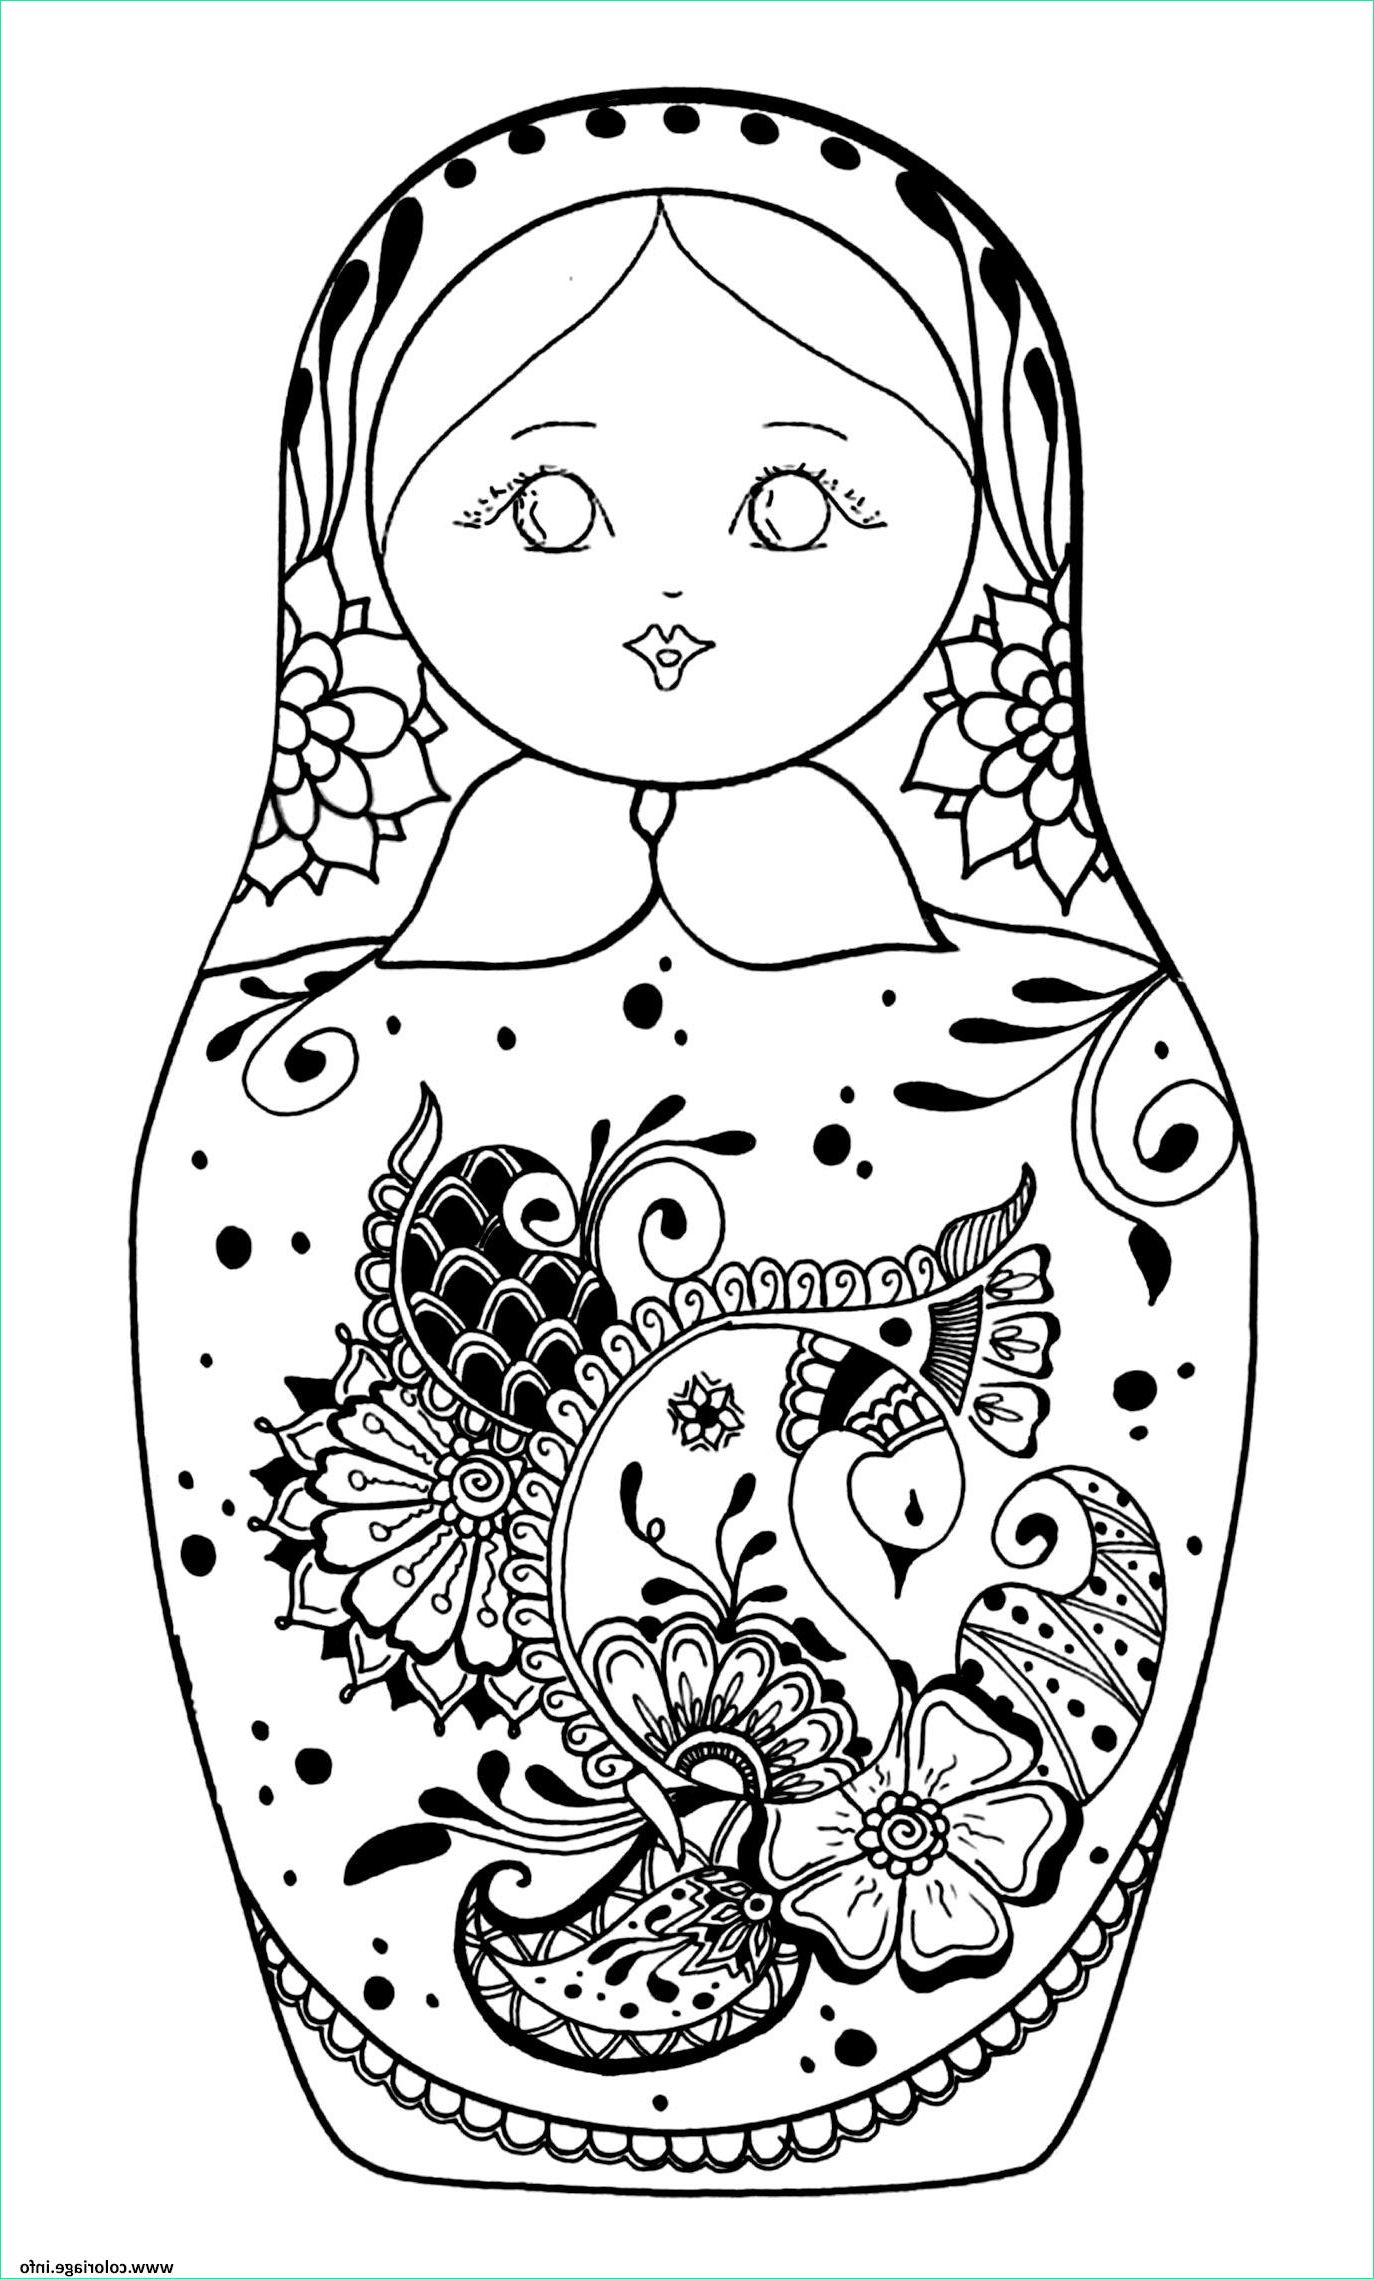 baby matryoshka doll poupee russe coloriage dessin